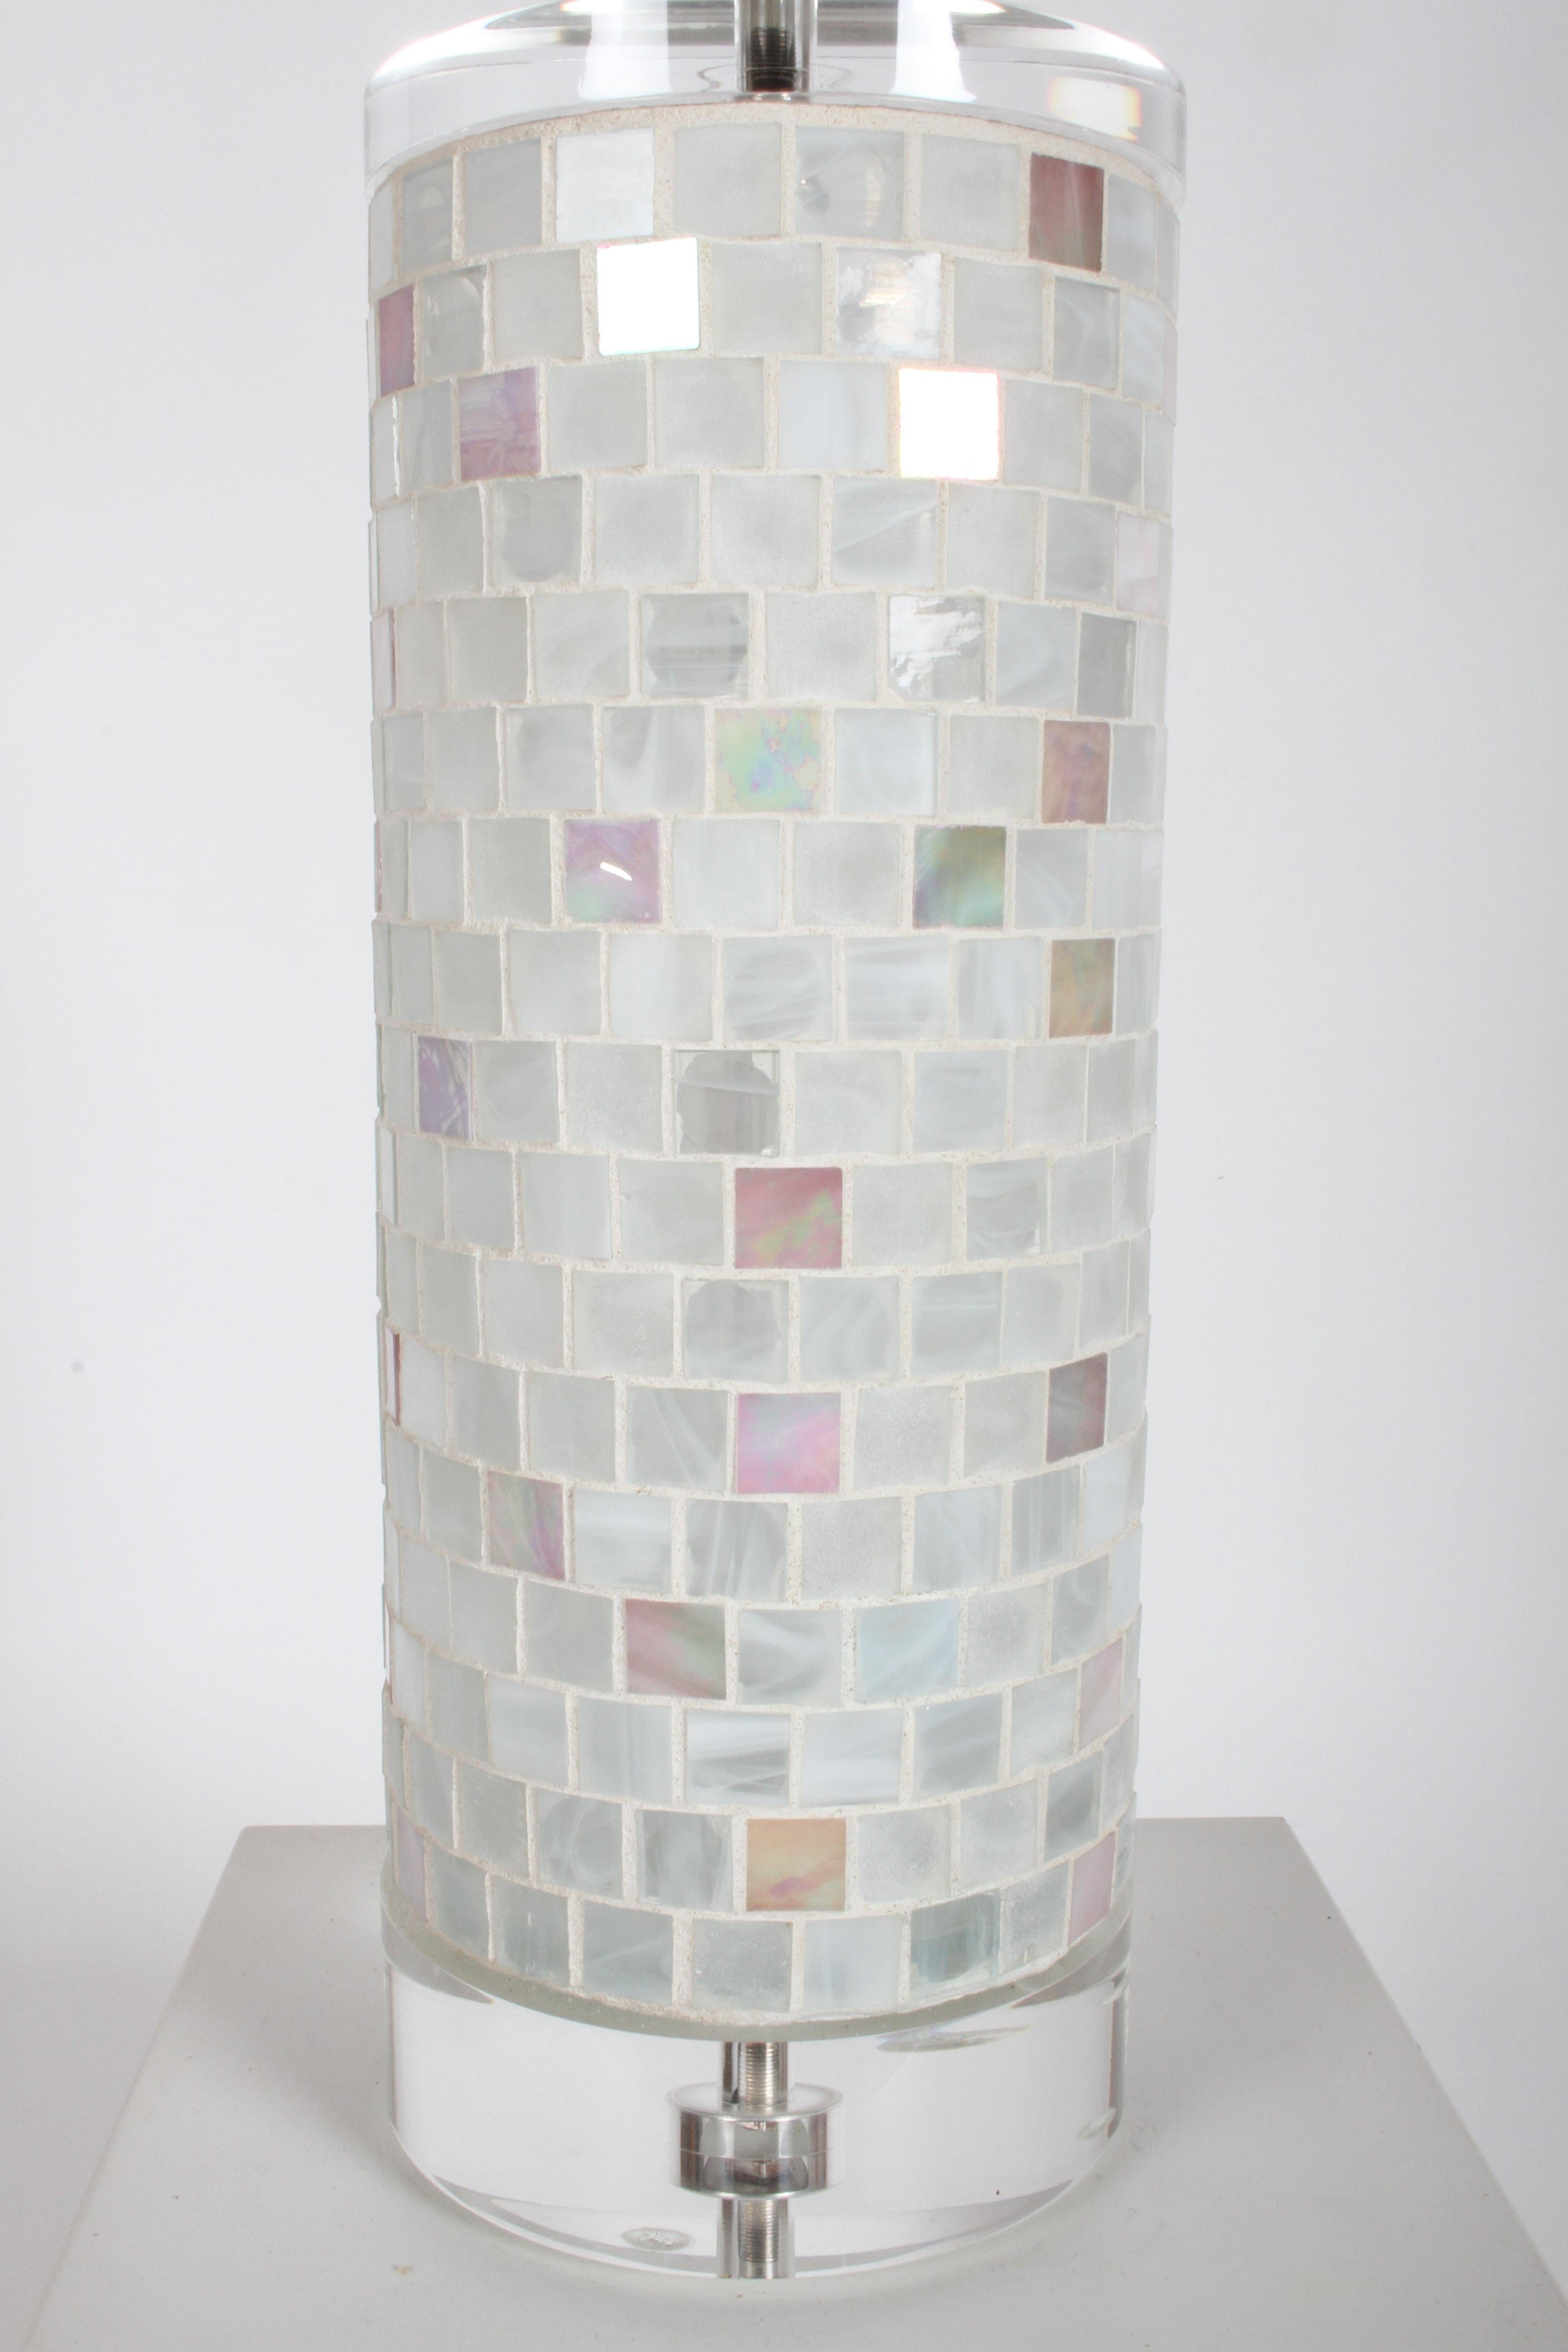 Pair of late 1970s or early 1980s Lucite cylinder form lamps with Italian Murano glass mosaic tiles around standard of lamps. No loose or broken tiles, Lucite has lite scuffs. Some tiles are iridescent, others are opaque. Has thick Lucite base and